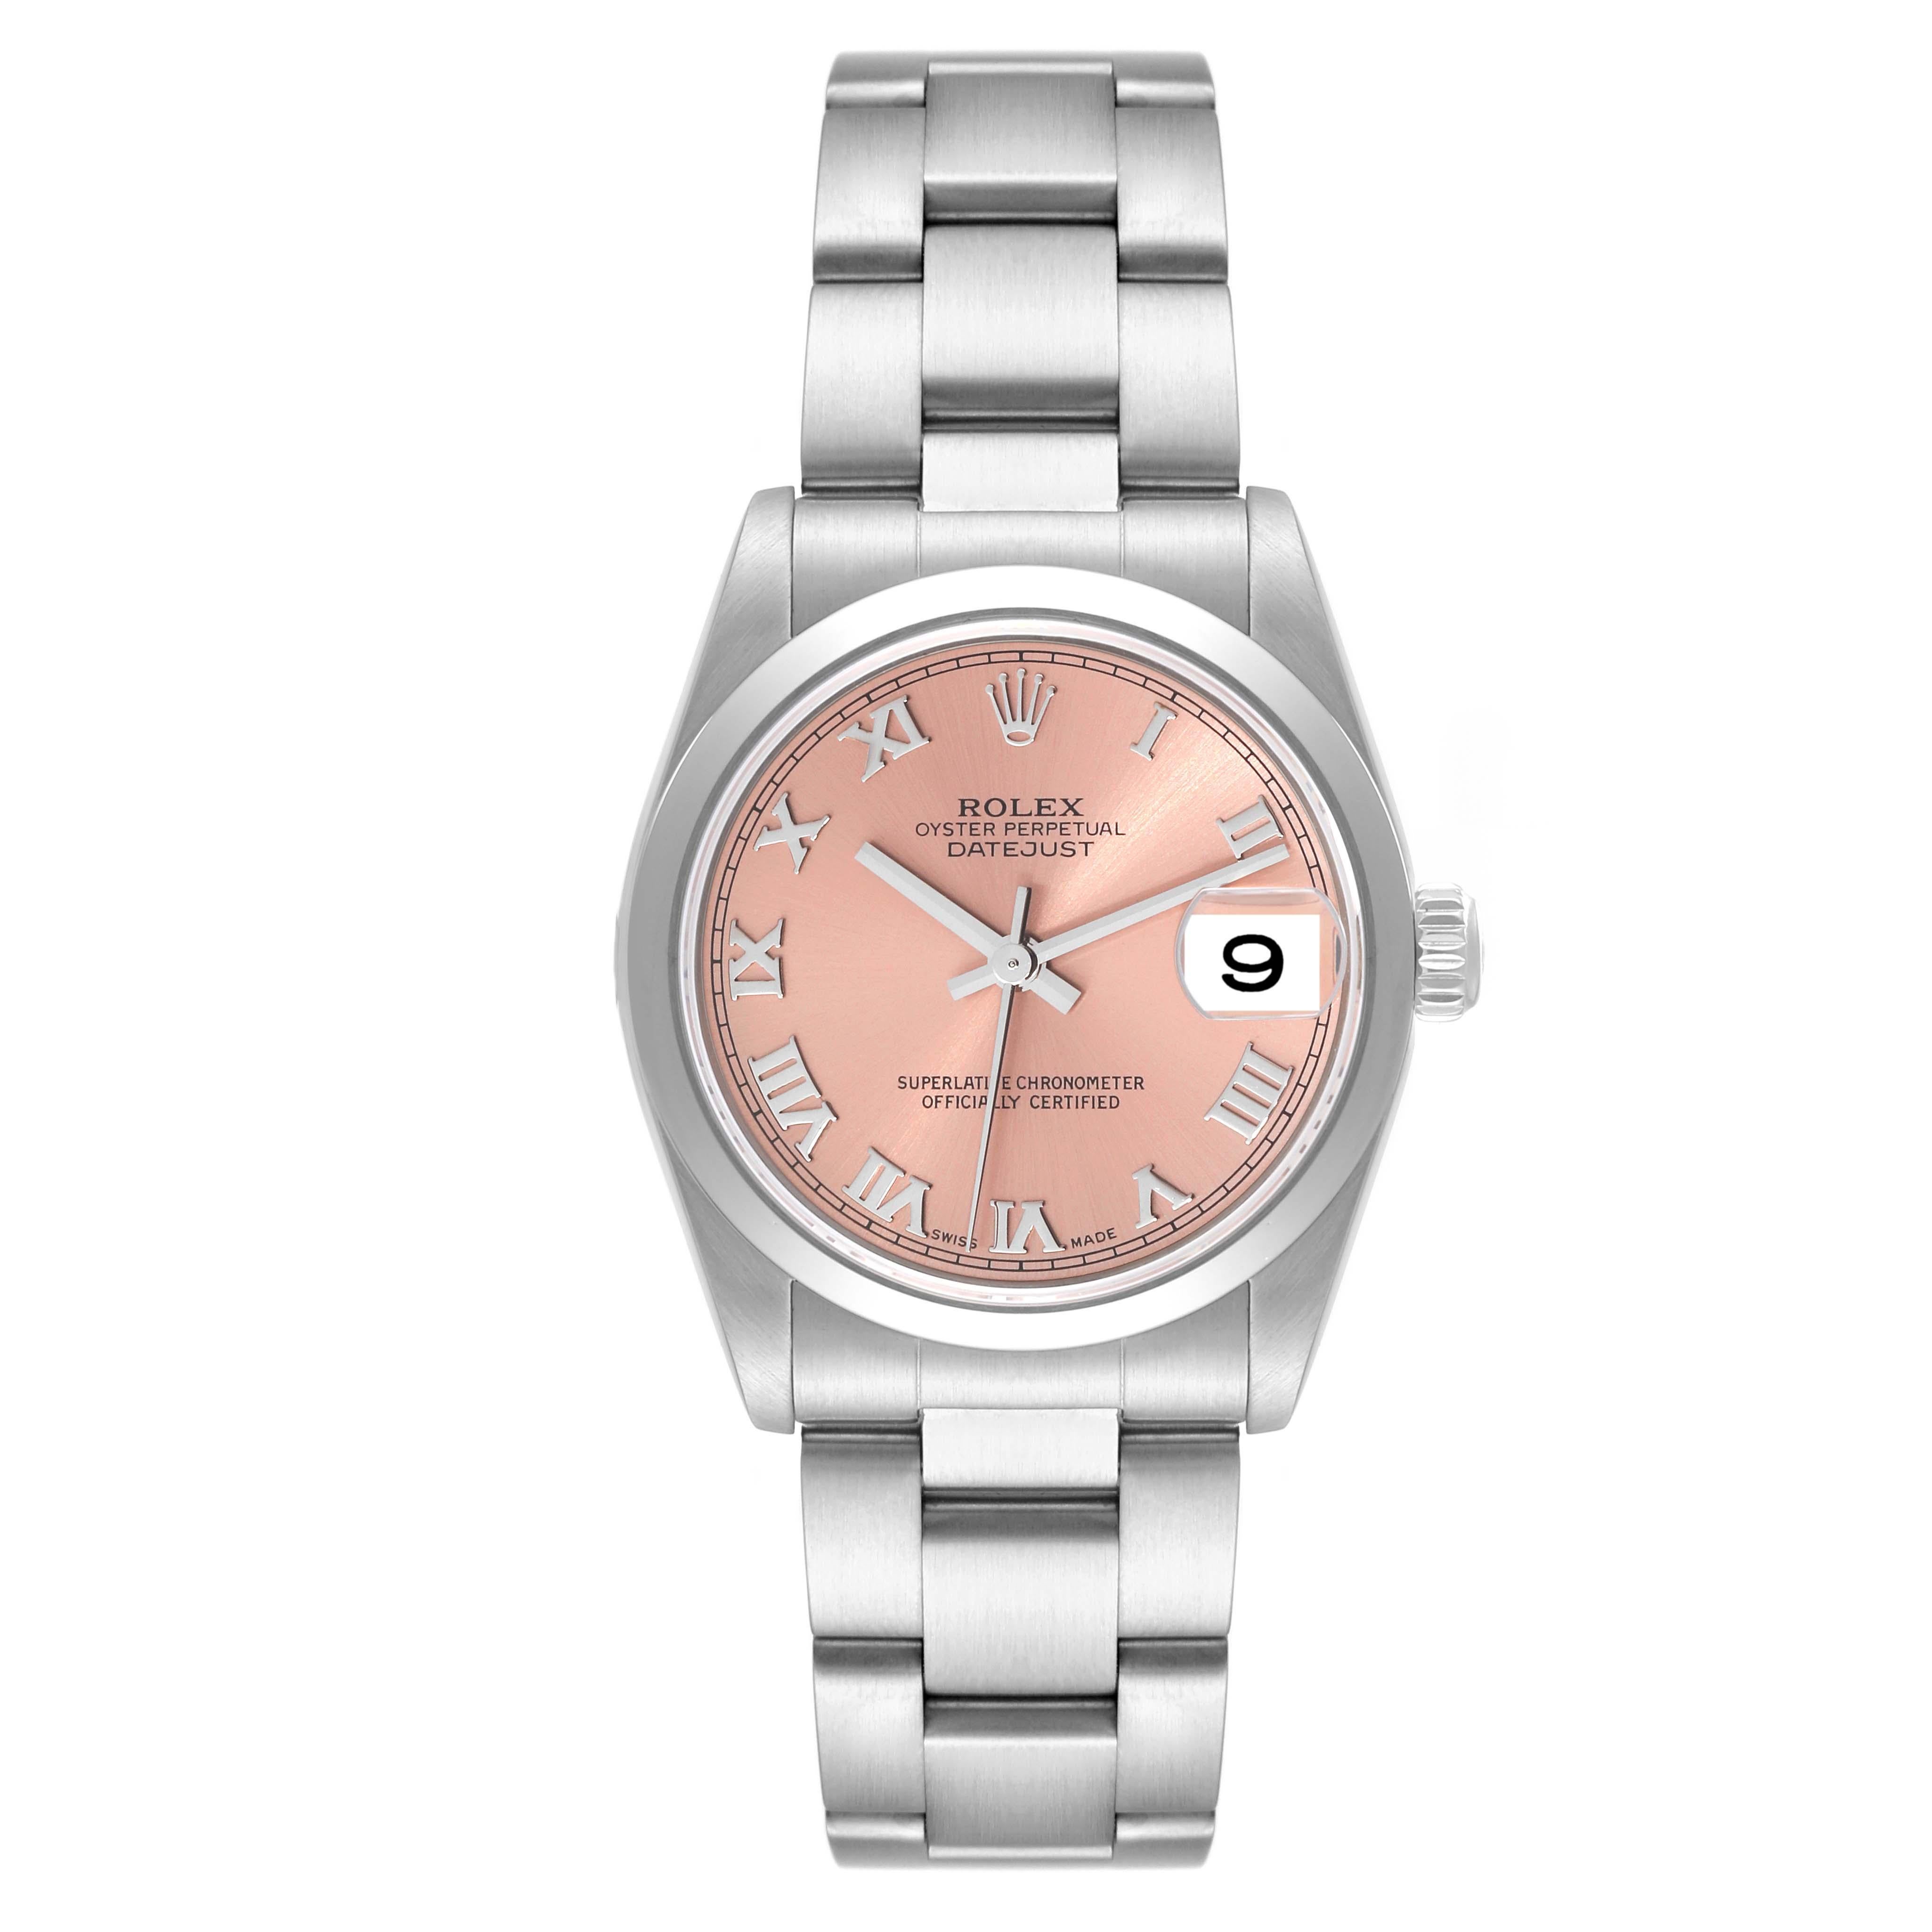 Rolex Datejust 31 Midsize Salmon Dial Steel Ladies Watch 78240 Box Papers. Officially certified chronometer automatic self-winding movement. Stainless steel oyster case 31 mm in diameter. Rolex logo on a crown. Stainless steel smooth domed bezel.